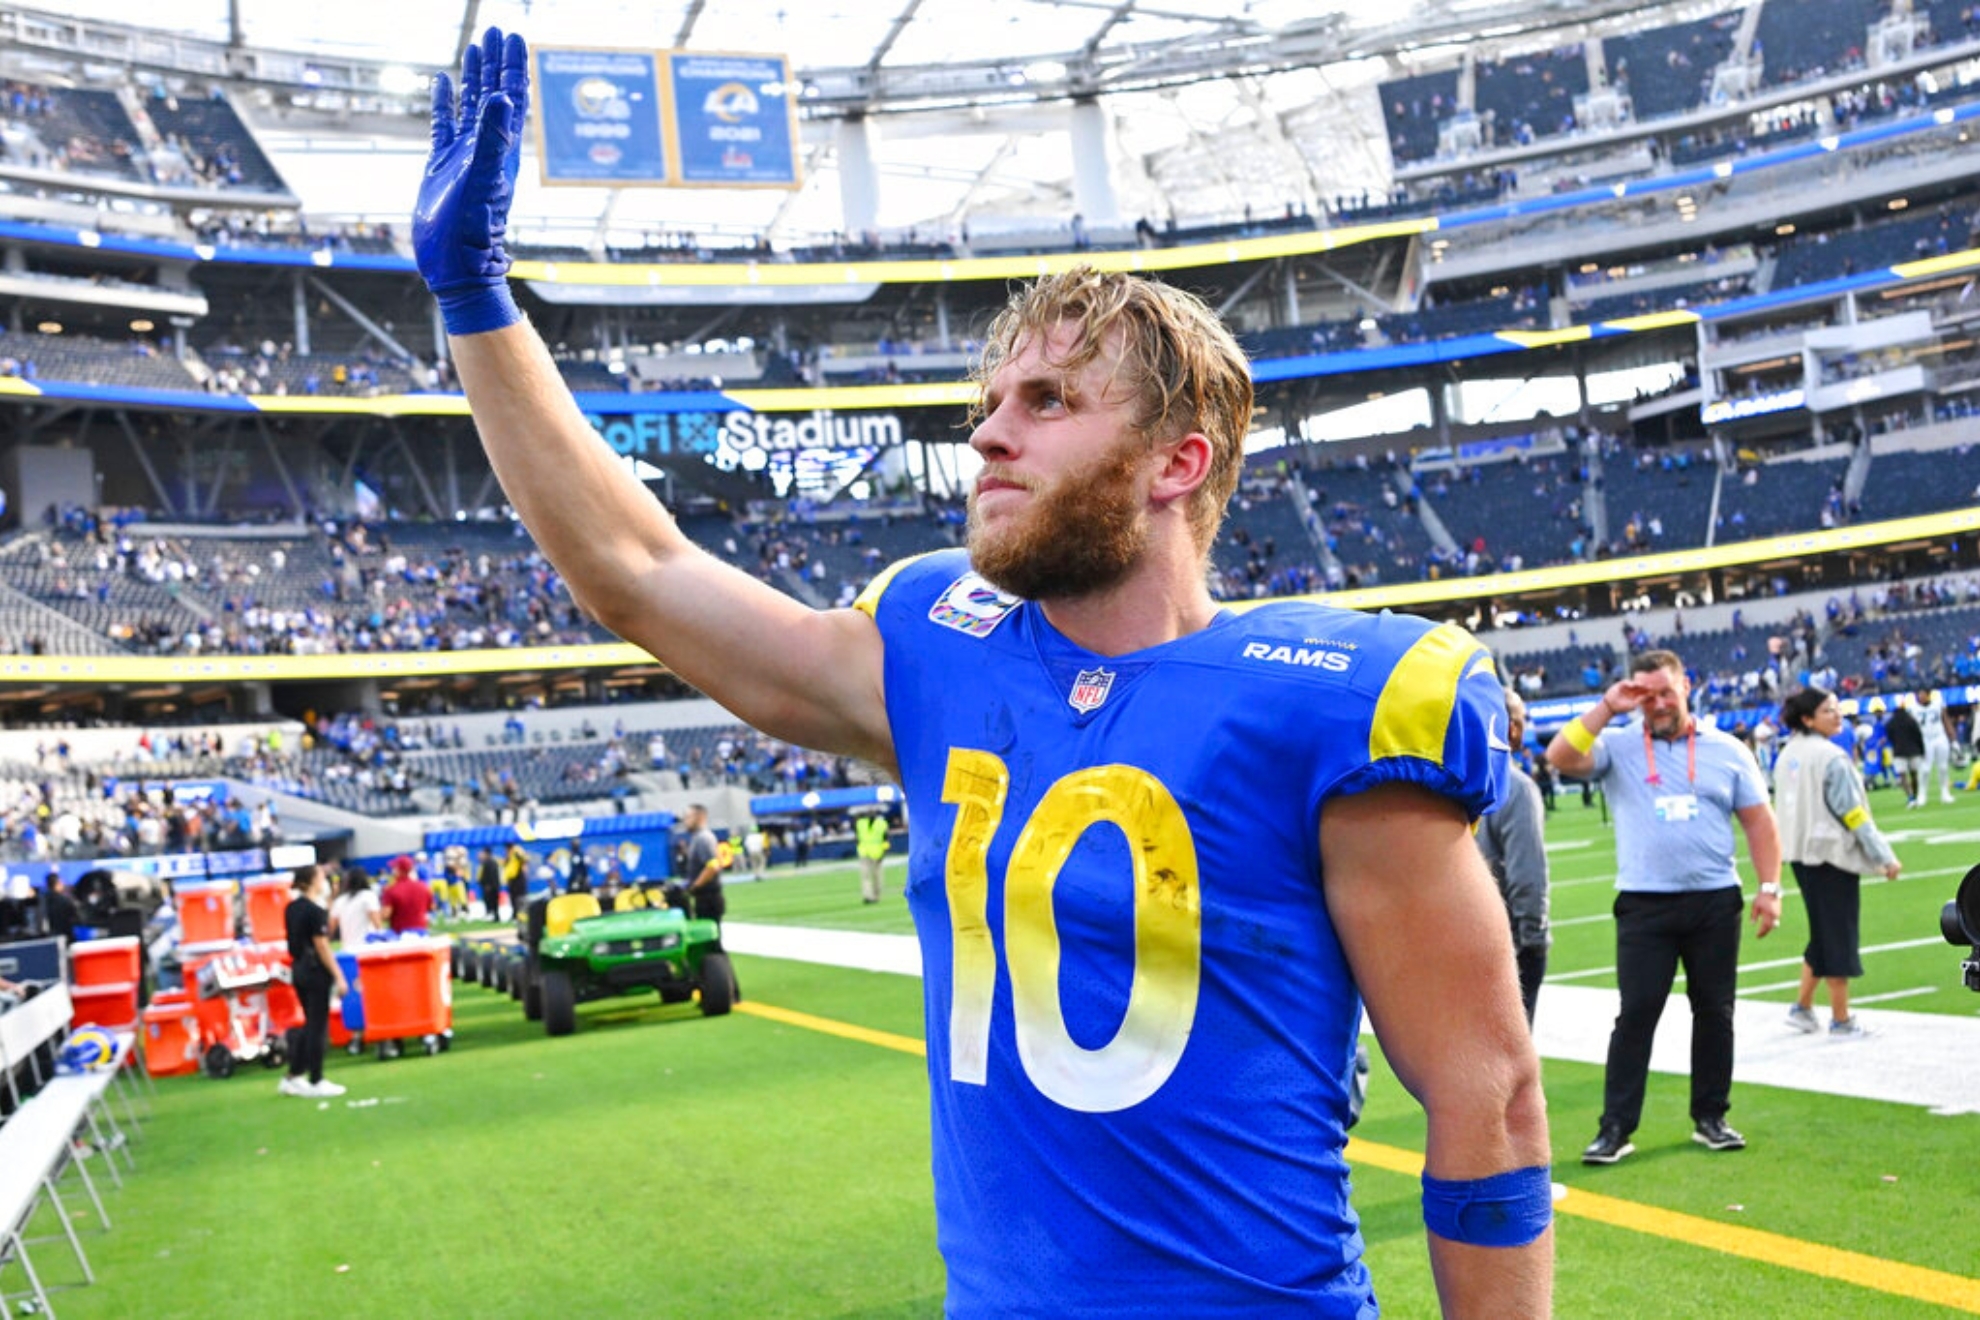 Kupp has faced another injury setback as the Rams struggles continue